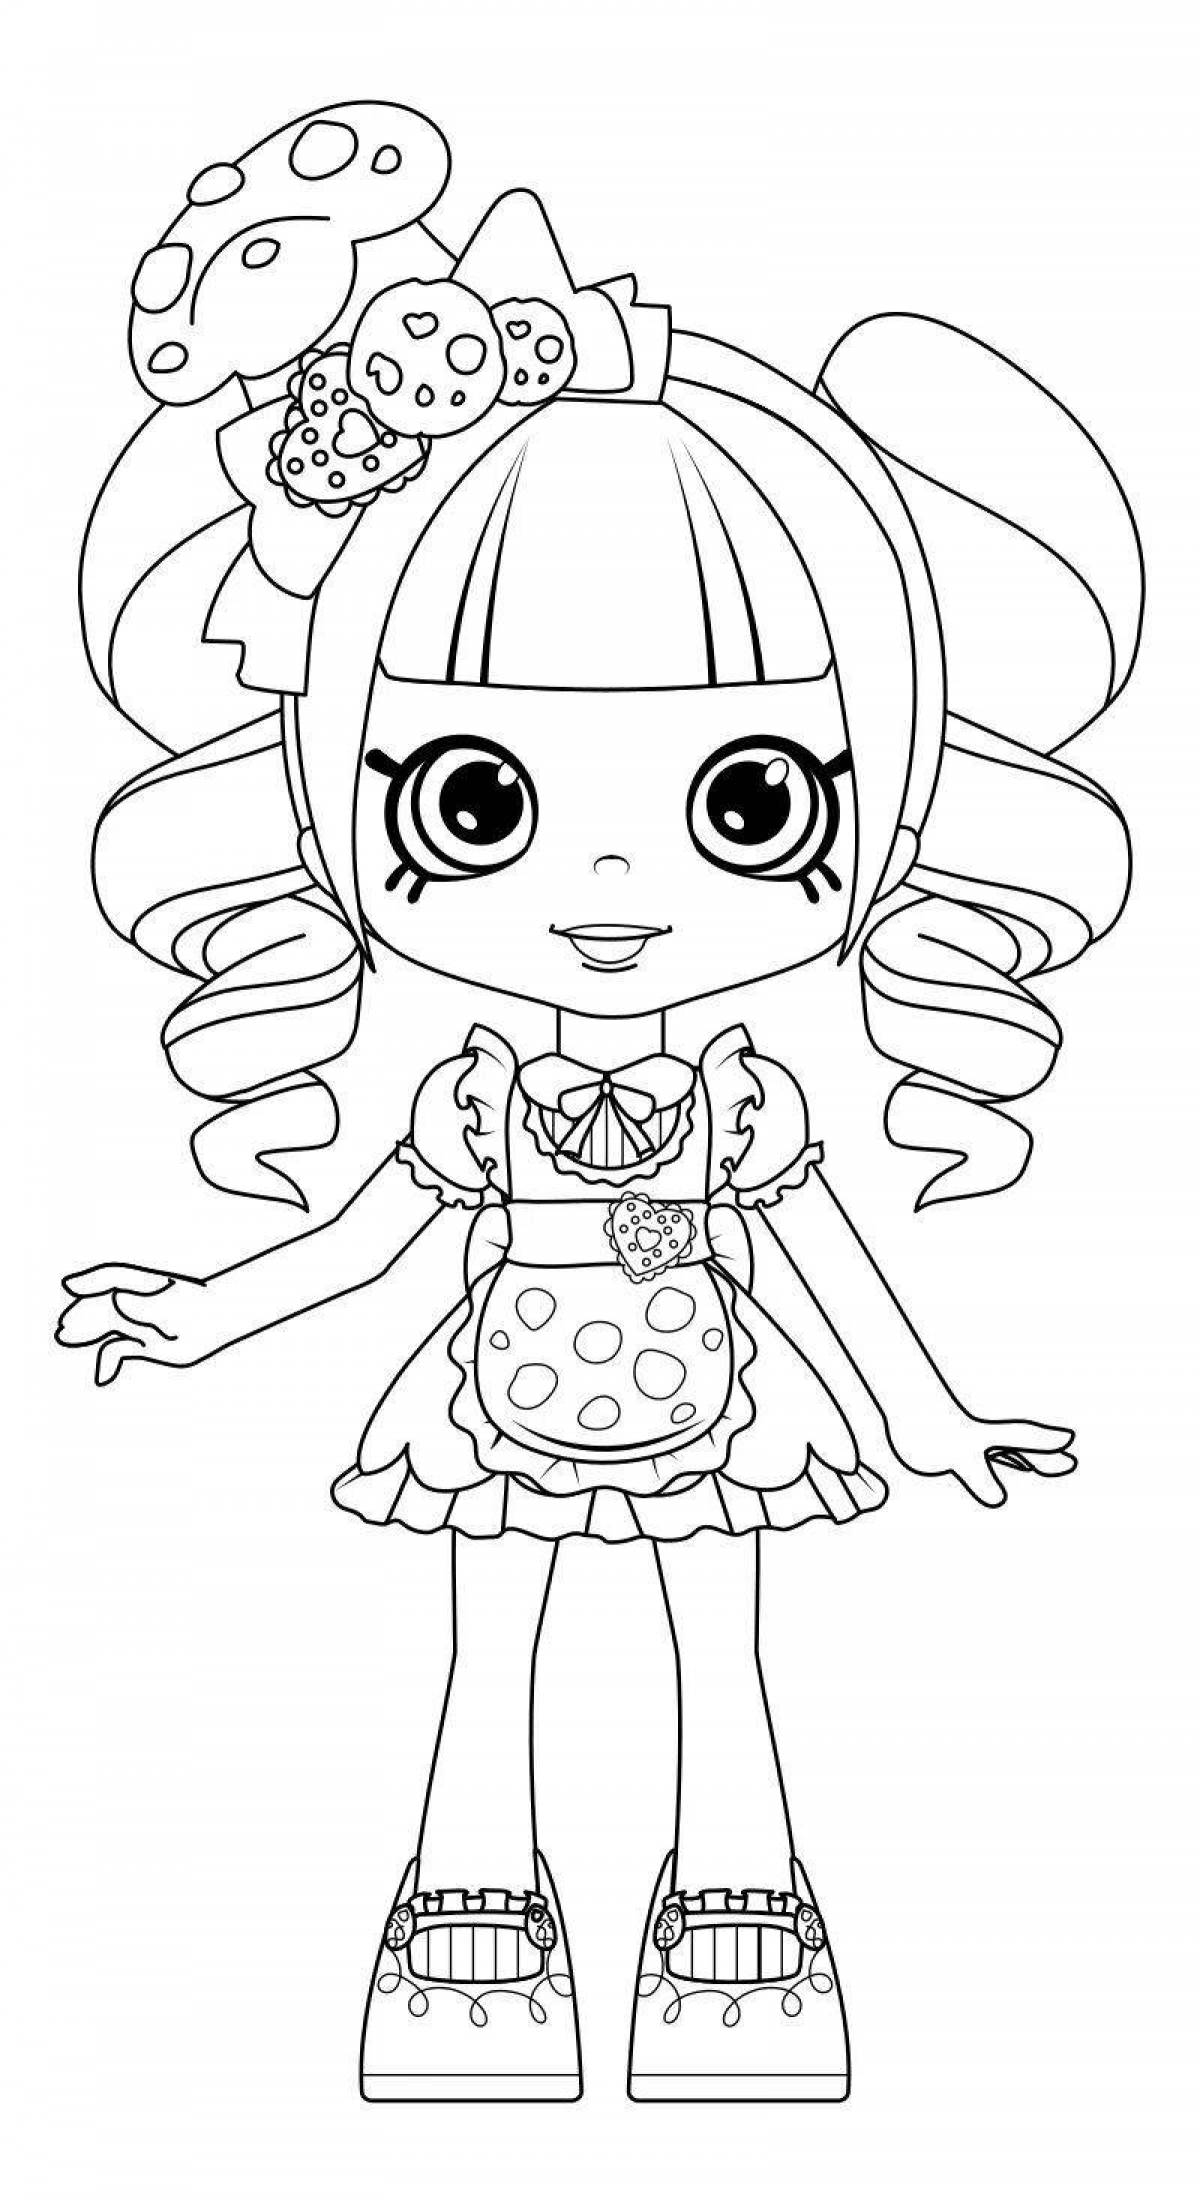 Chachimol live coloring page